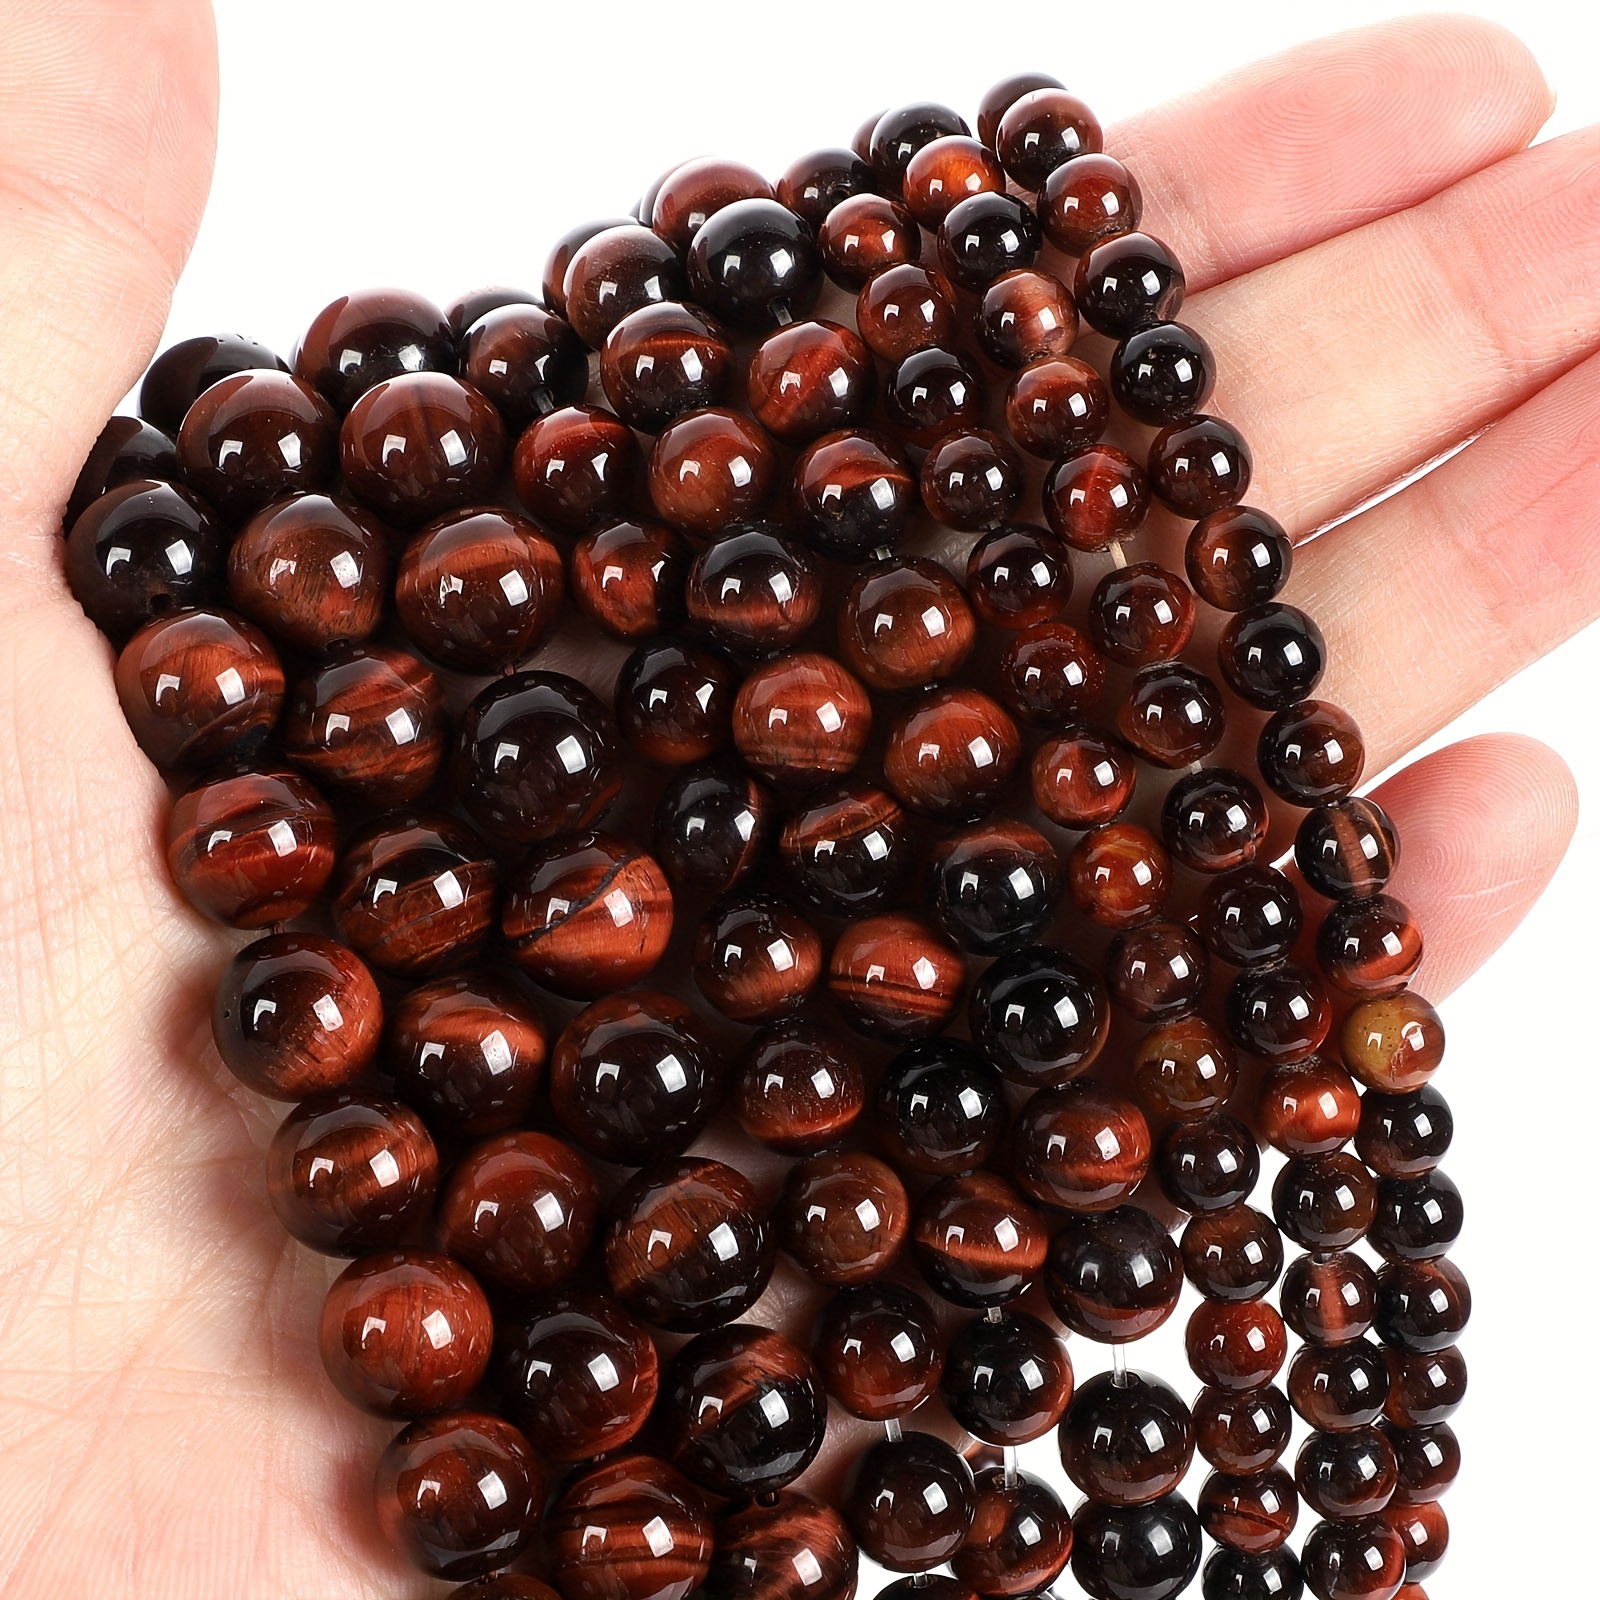 AAA+28 type round beads, high quality natural stone beads agate crystal  loose beads Jewelry MakingDIY necklace bracelets earrings jewelry  accessories beads lot4/6/8/10/12mm